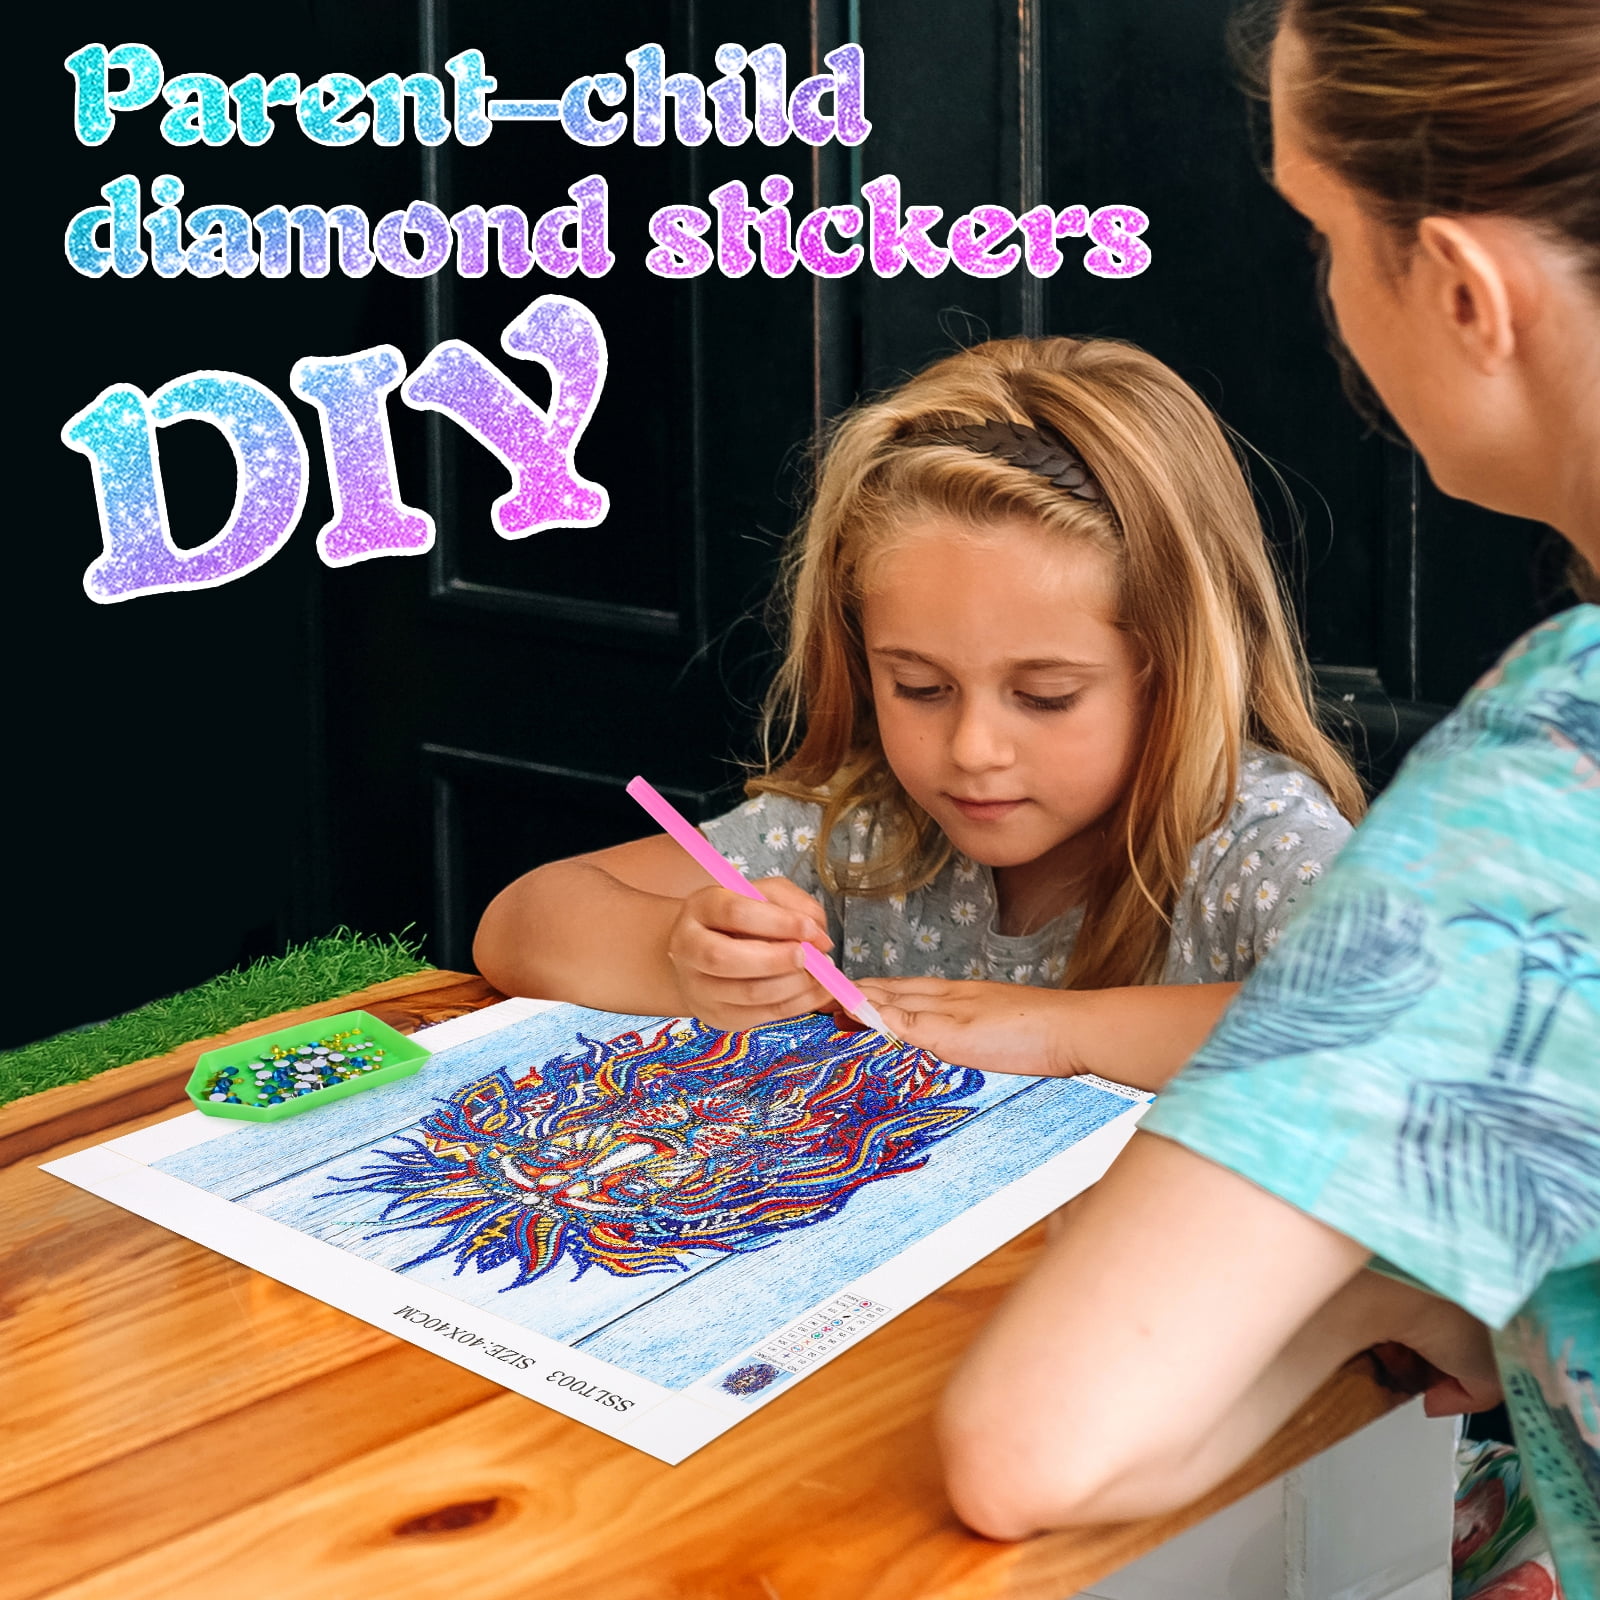 Kids Crafts Toys for 6-8-12 Year Old Girls Boys gifts: DIY Diamond